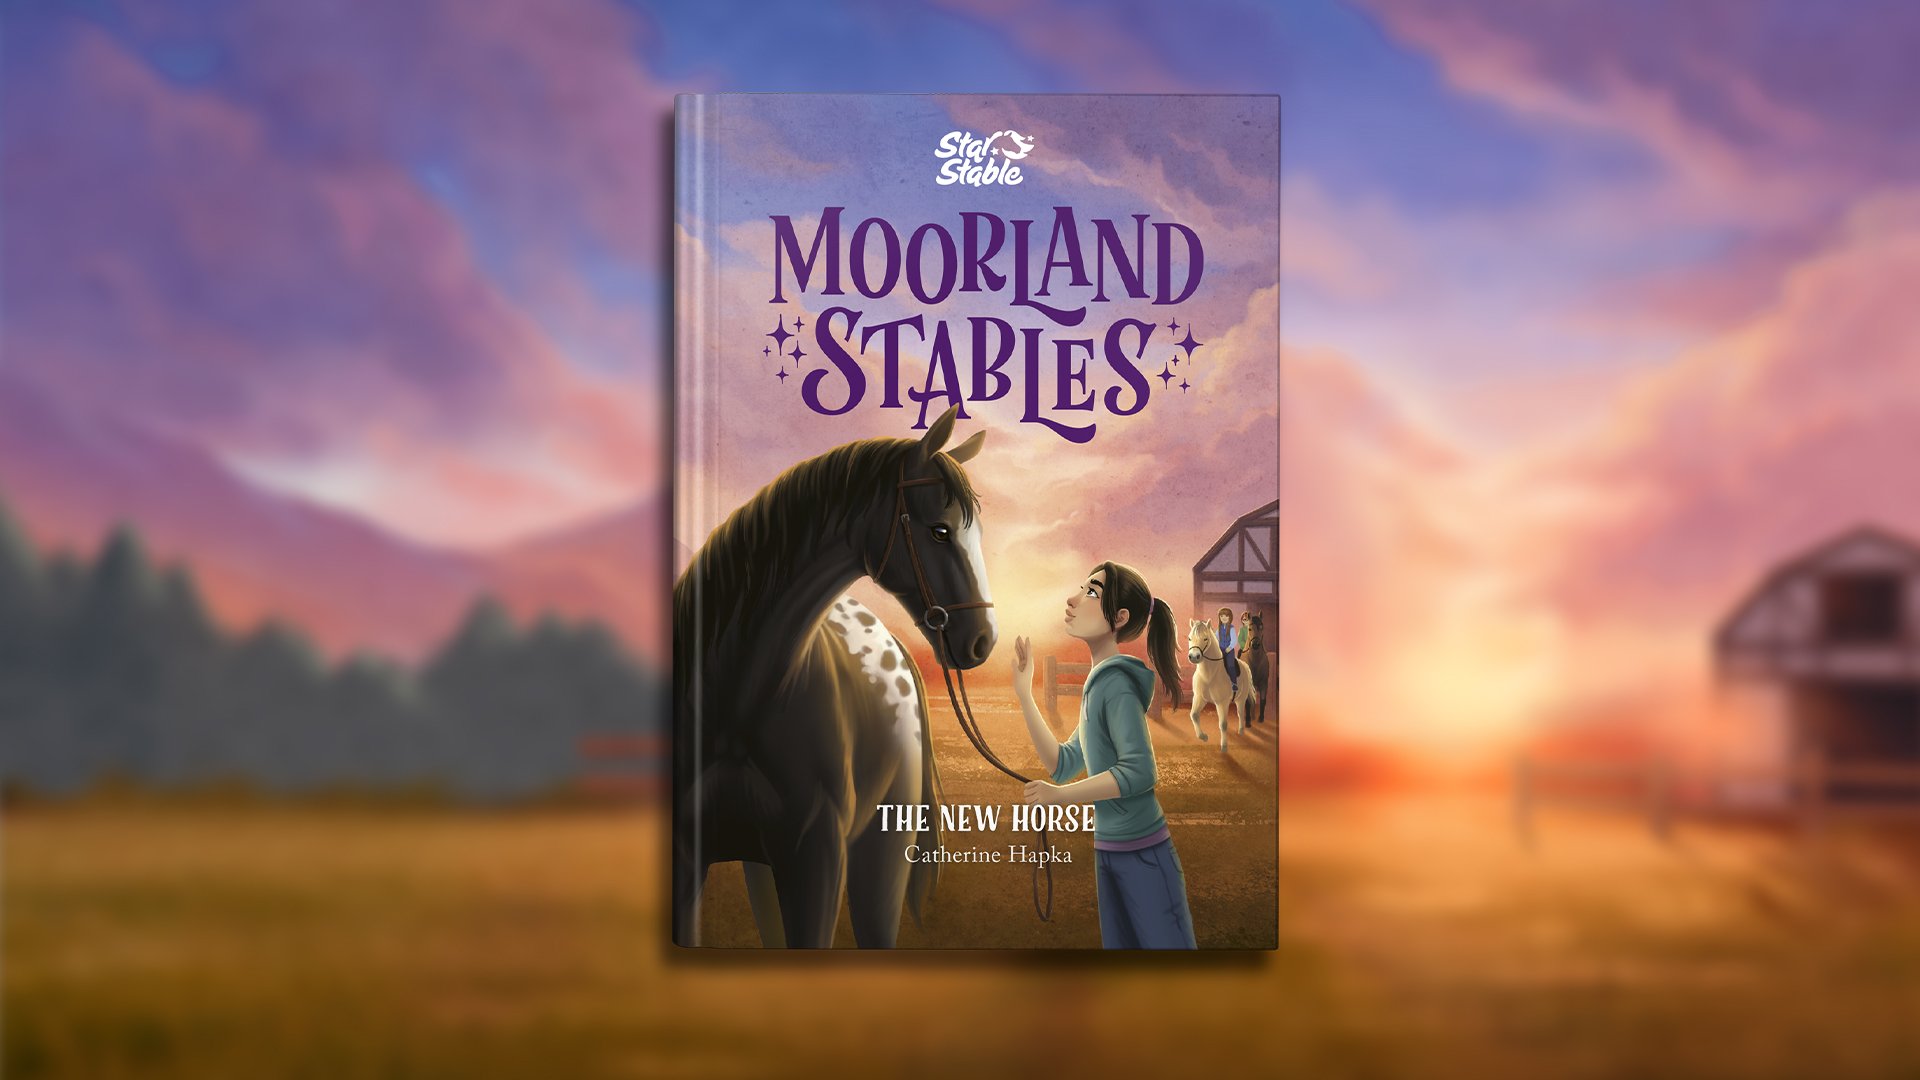 The New Horse – first Moorland Stables book